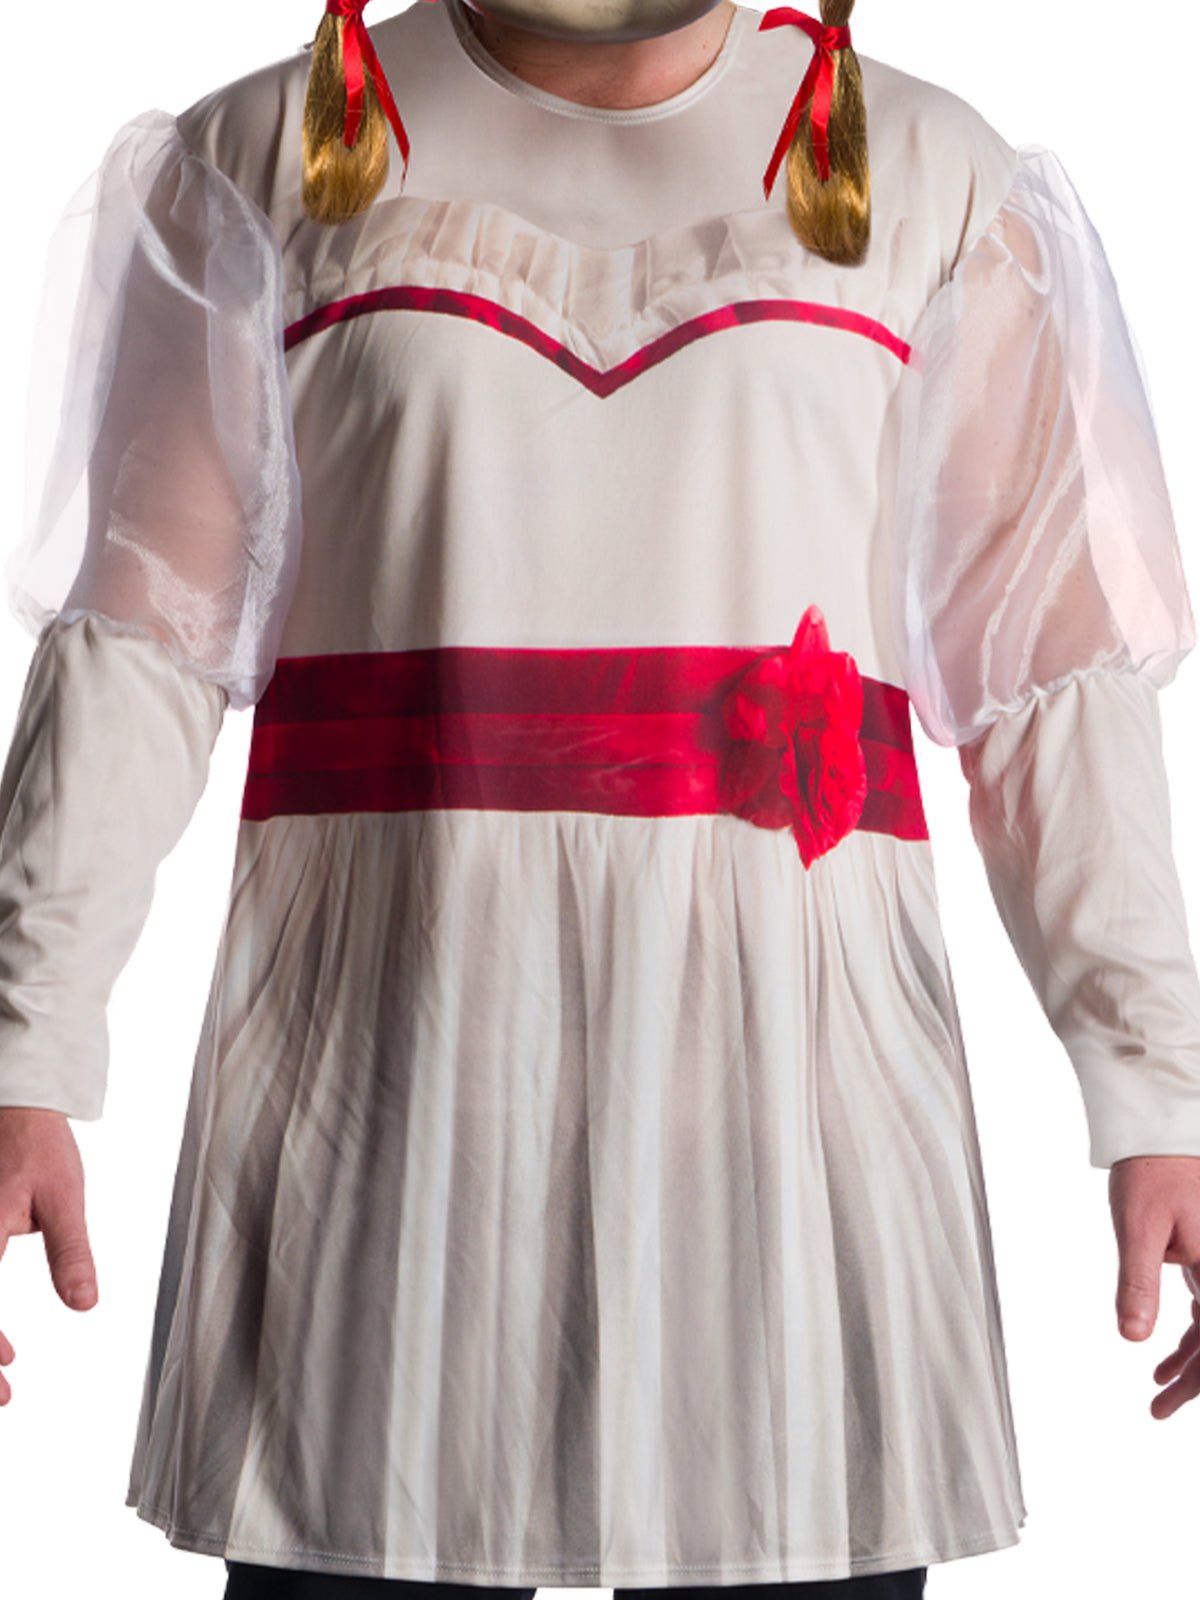 Annabelle Costume Top And Mask Adult